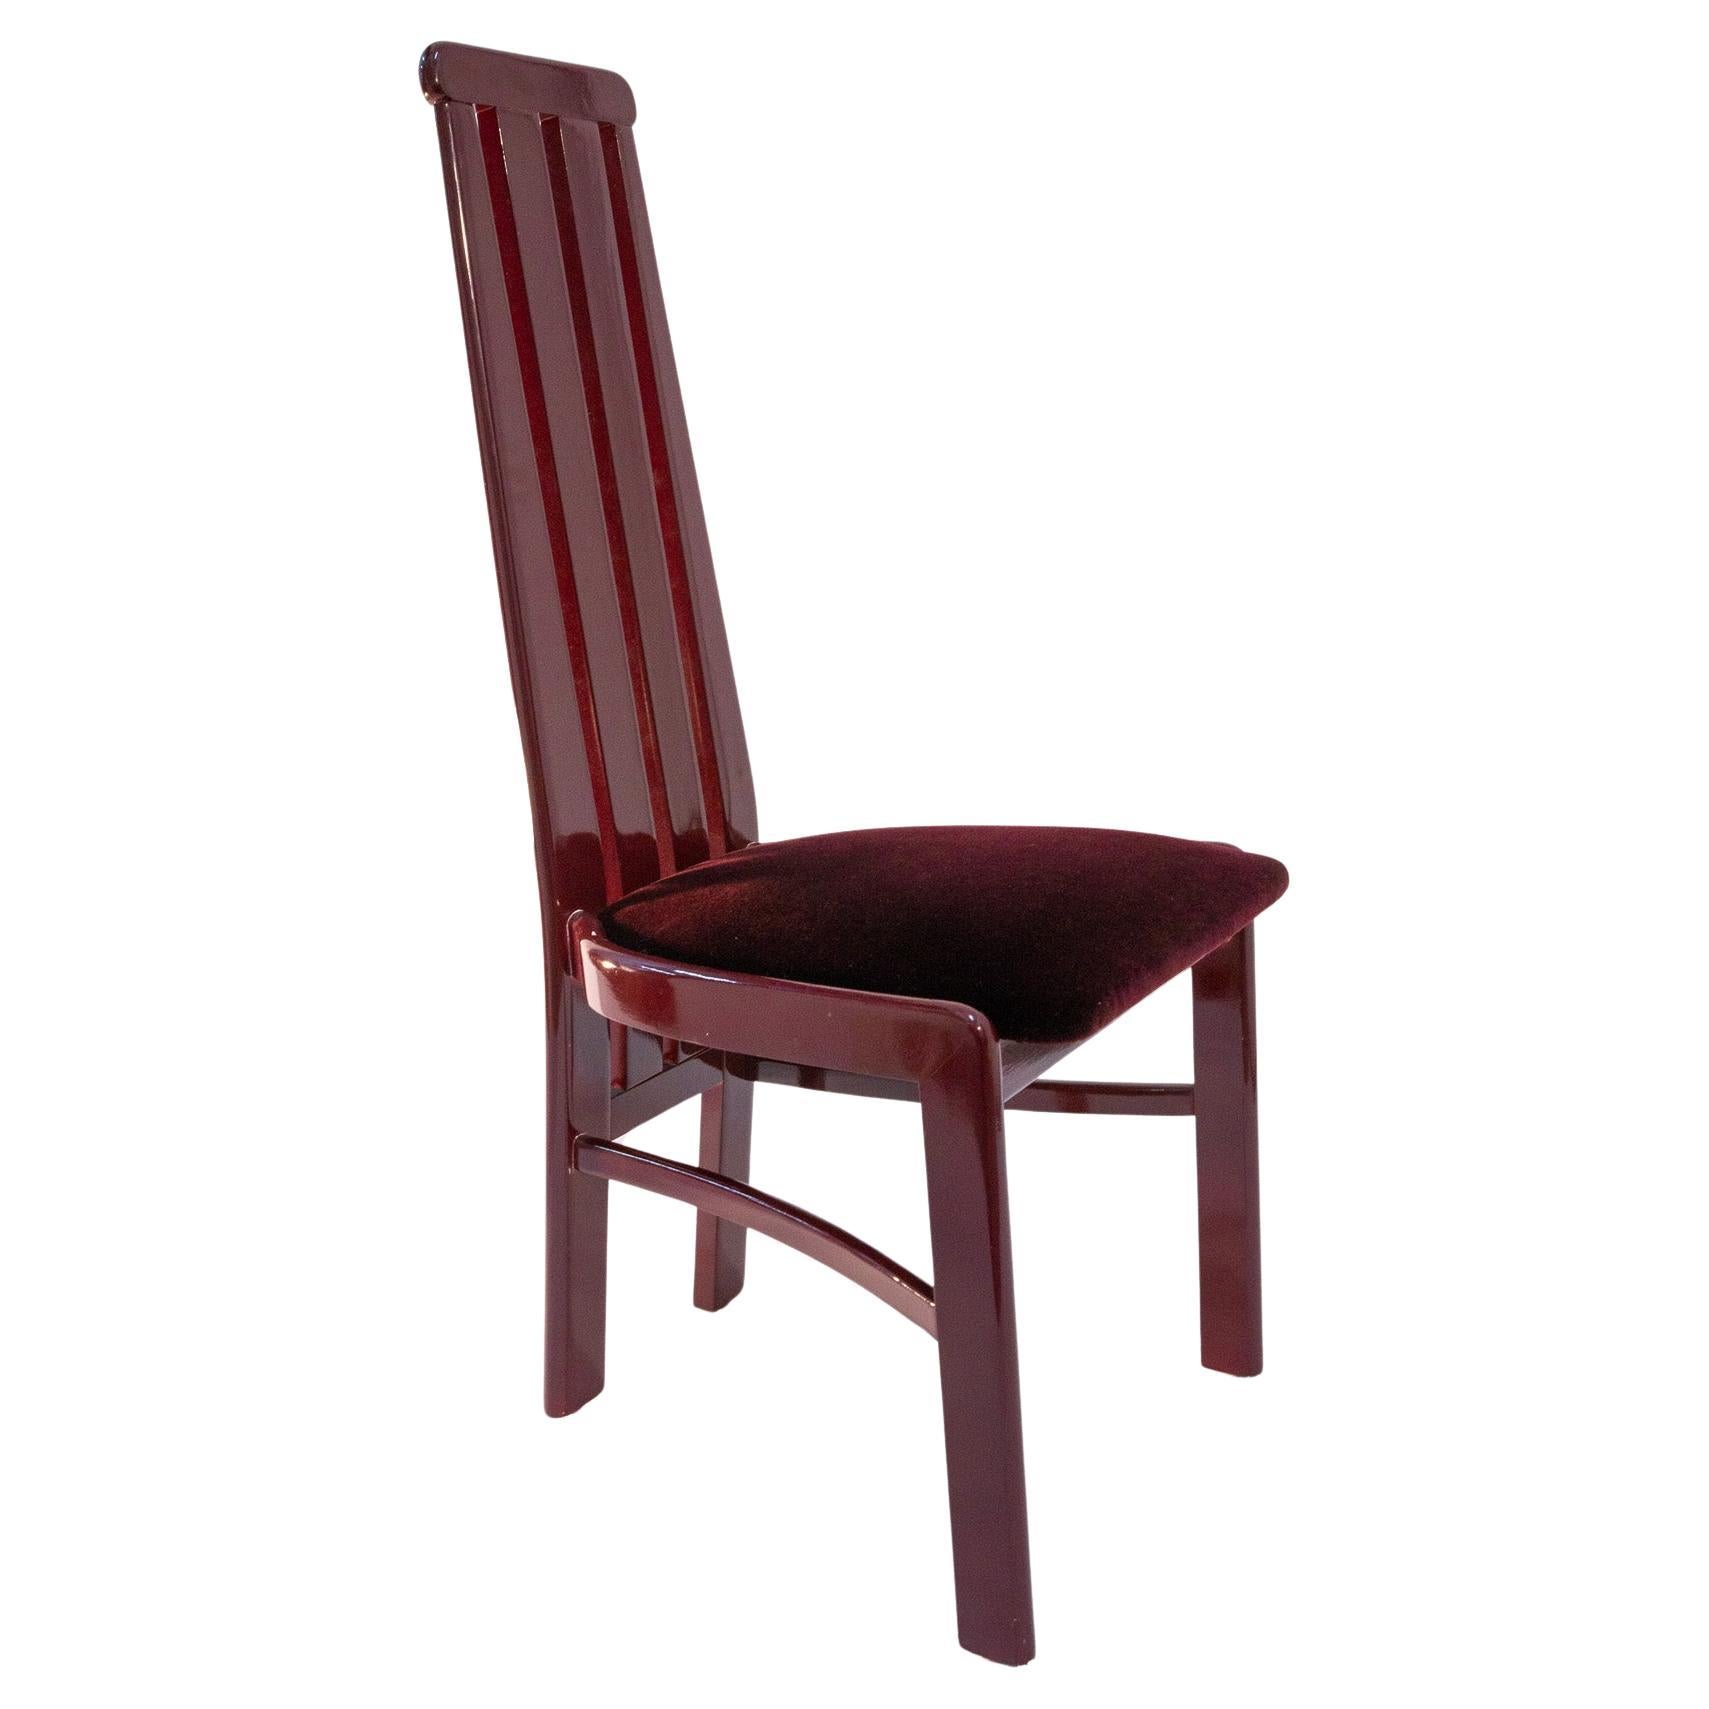 Paco Capdell Sillero Dining Chair